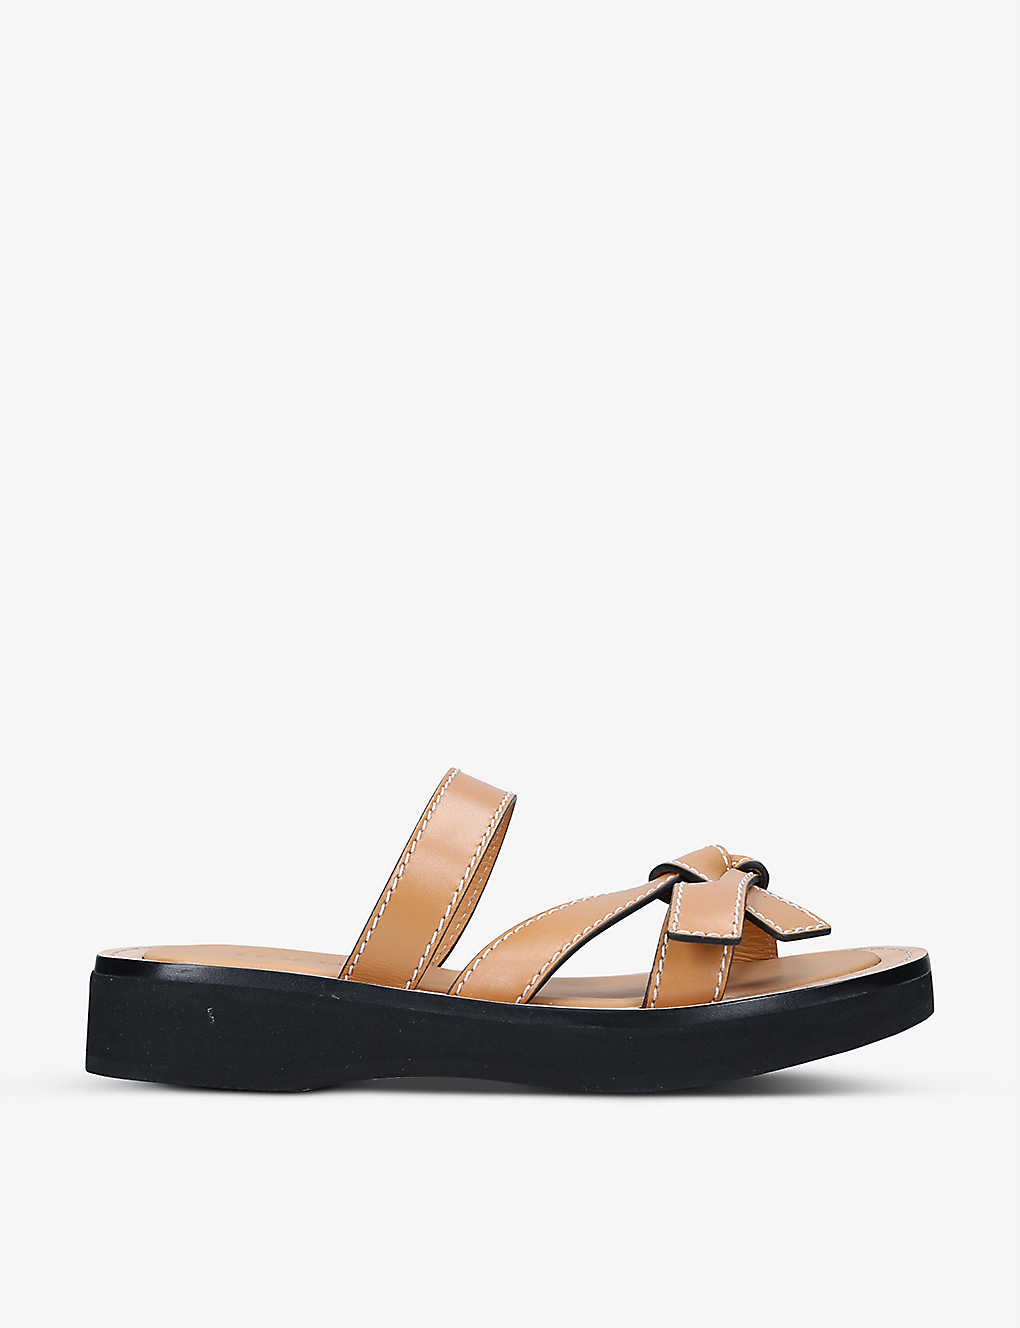 Gate knot-strap leather sandals(9200401)